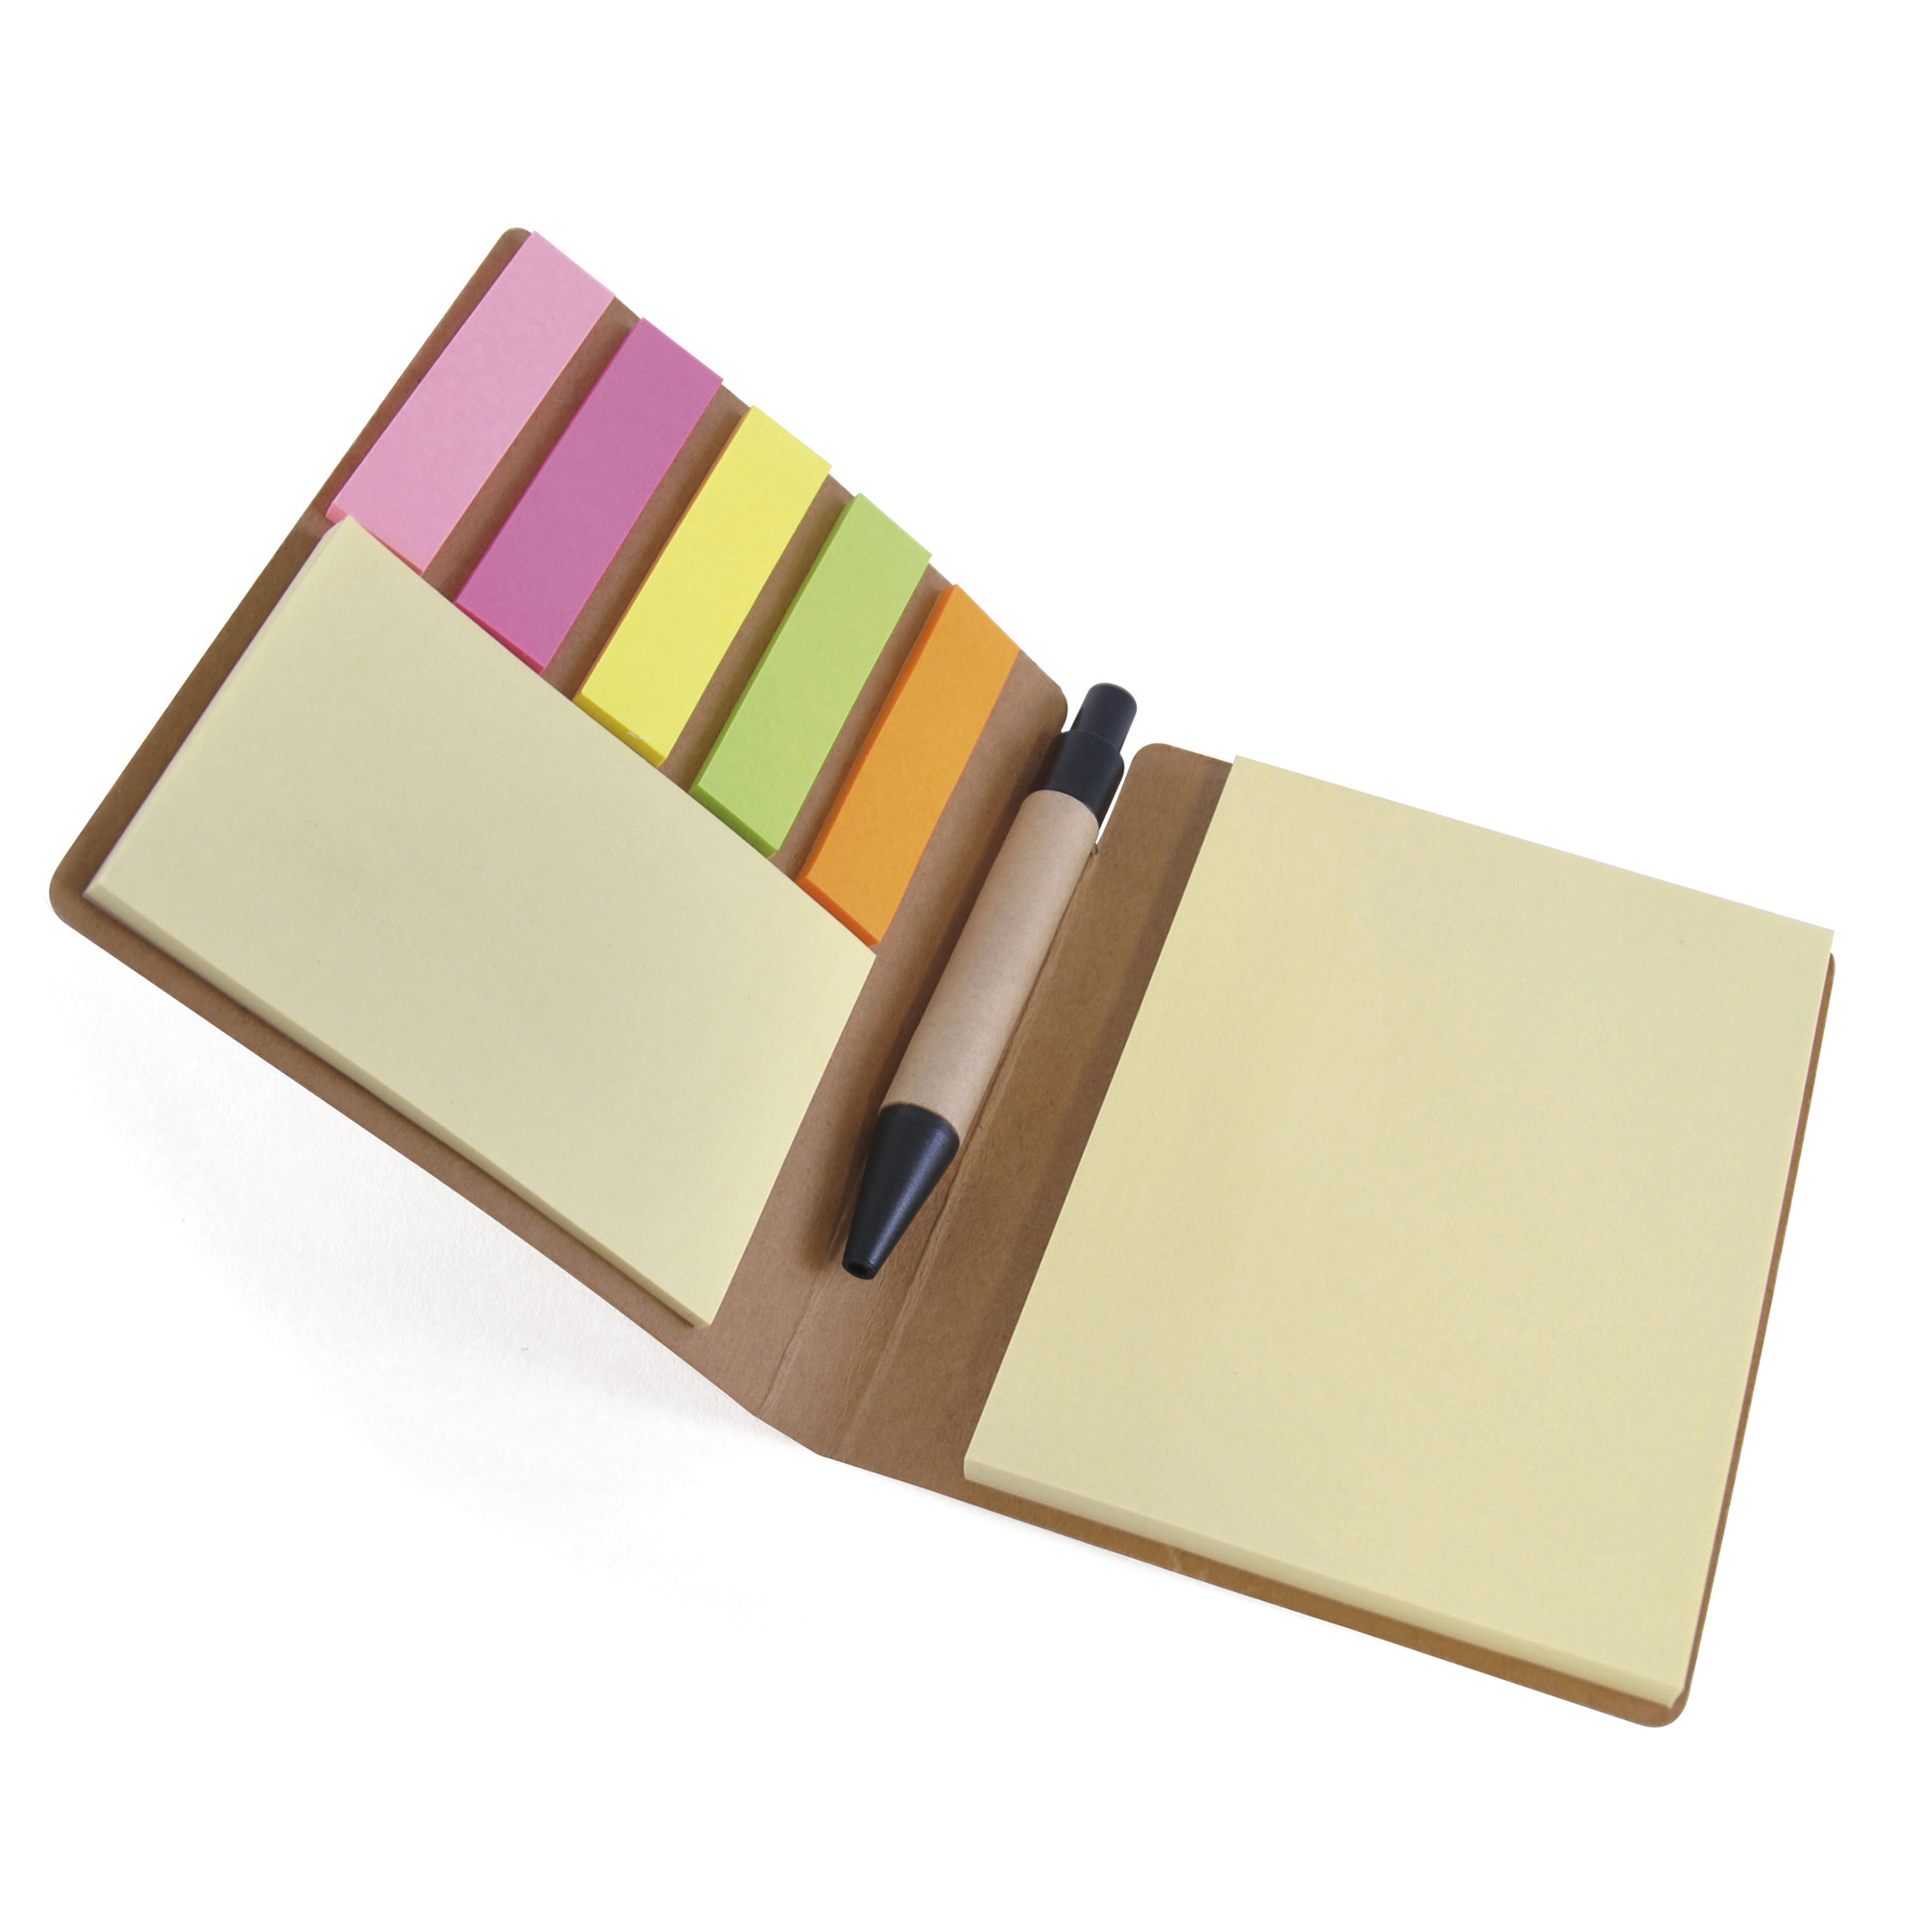 Dunmore notebook open showing sticky notes and pen inside